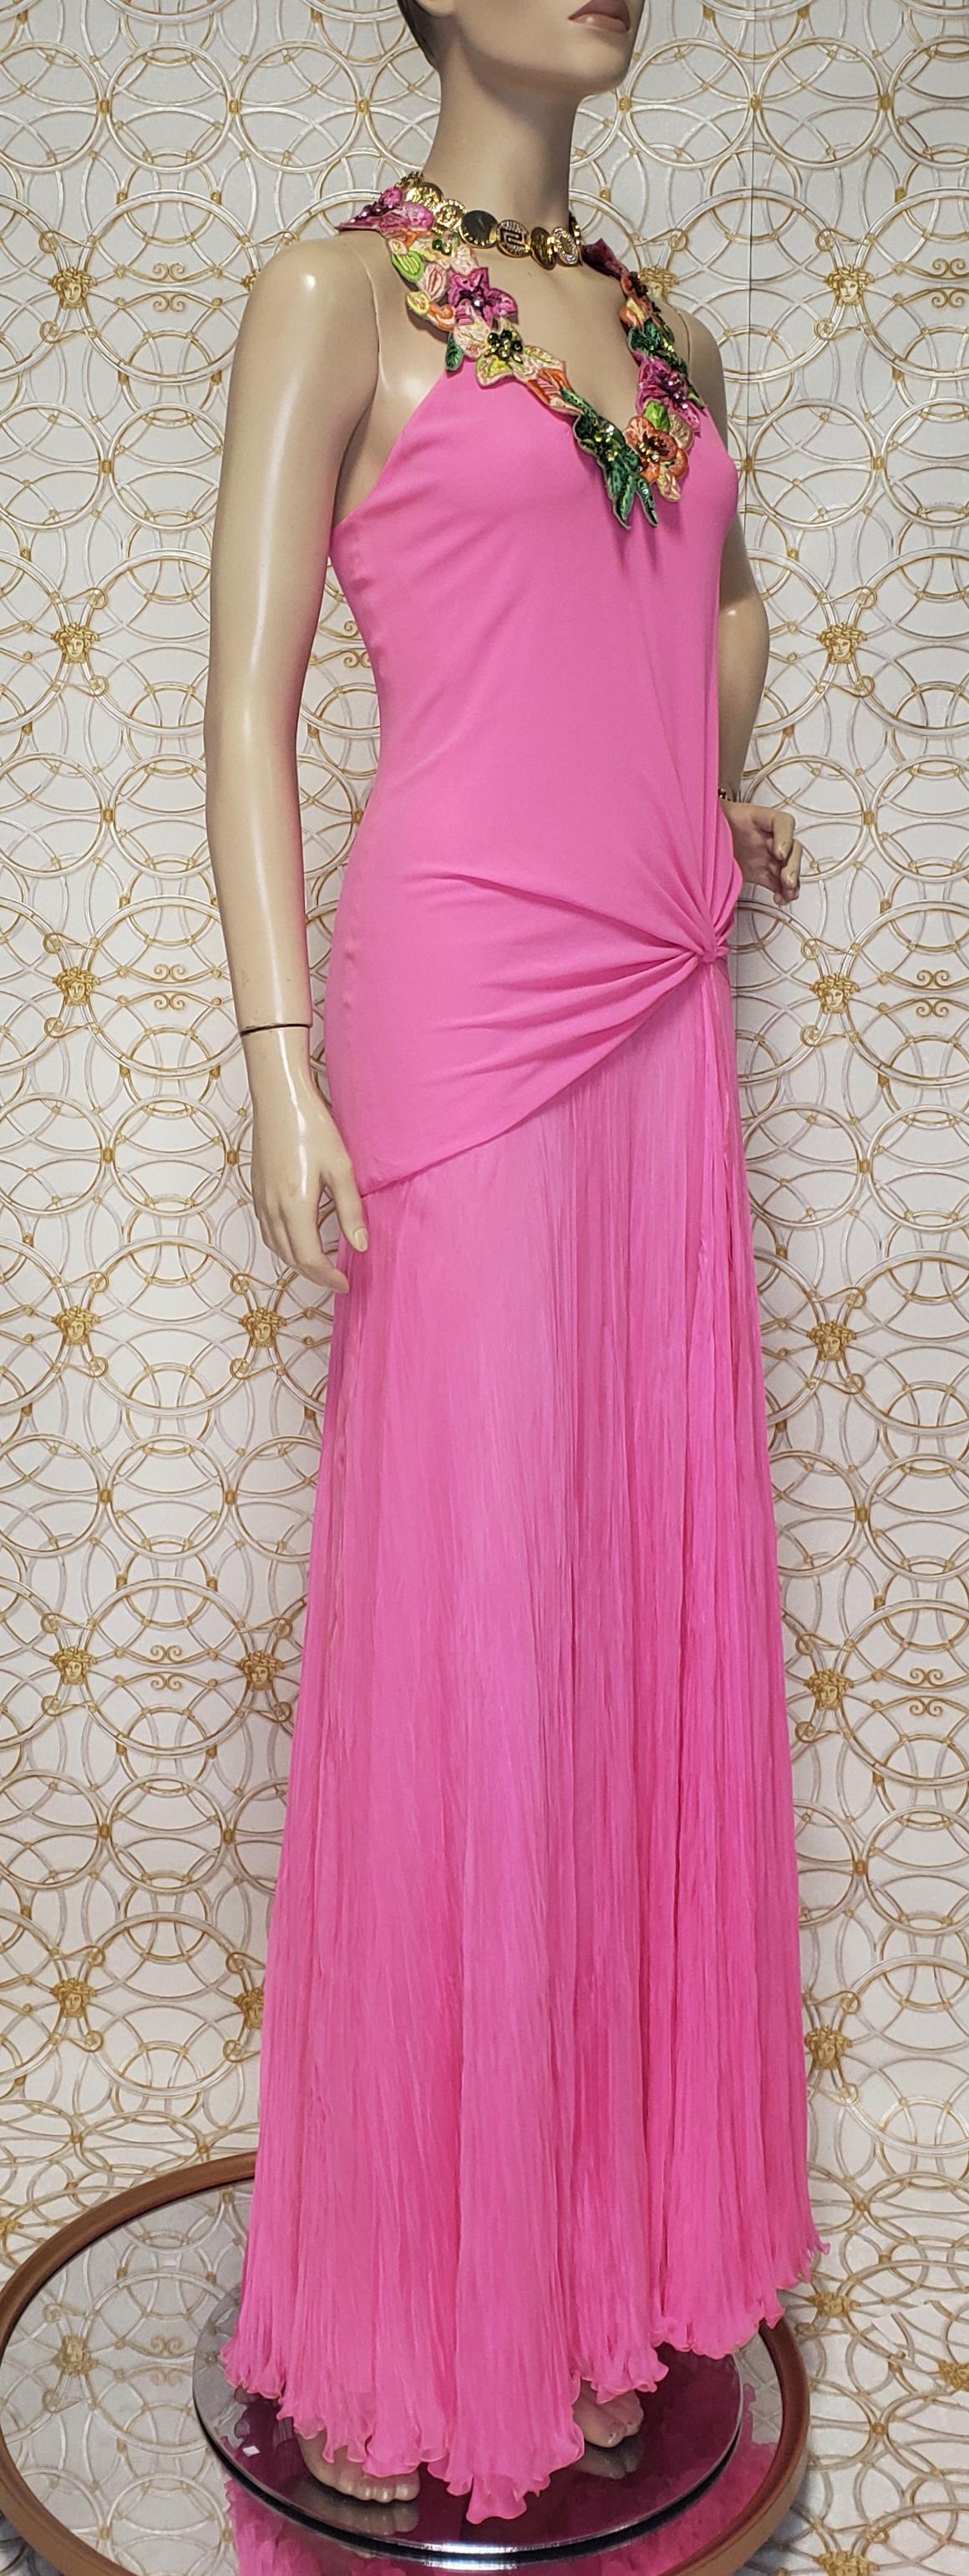 NEW VERSACE HOT PINK EMBELLISHED GOWN Sz 40 - 4 For Sale 7